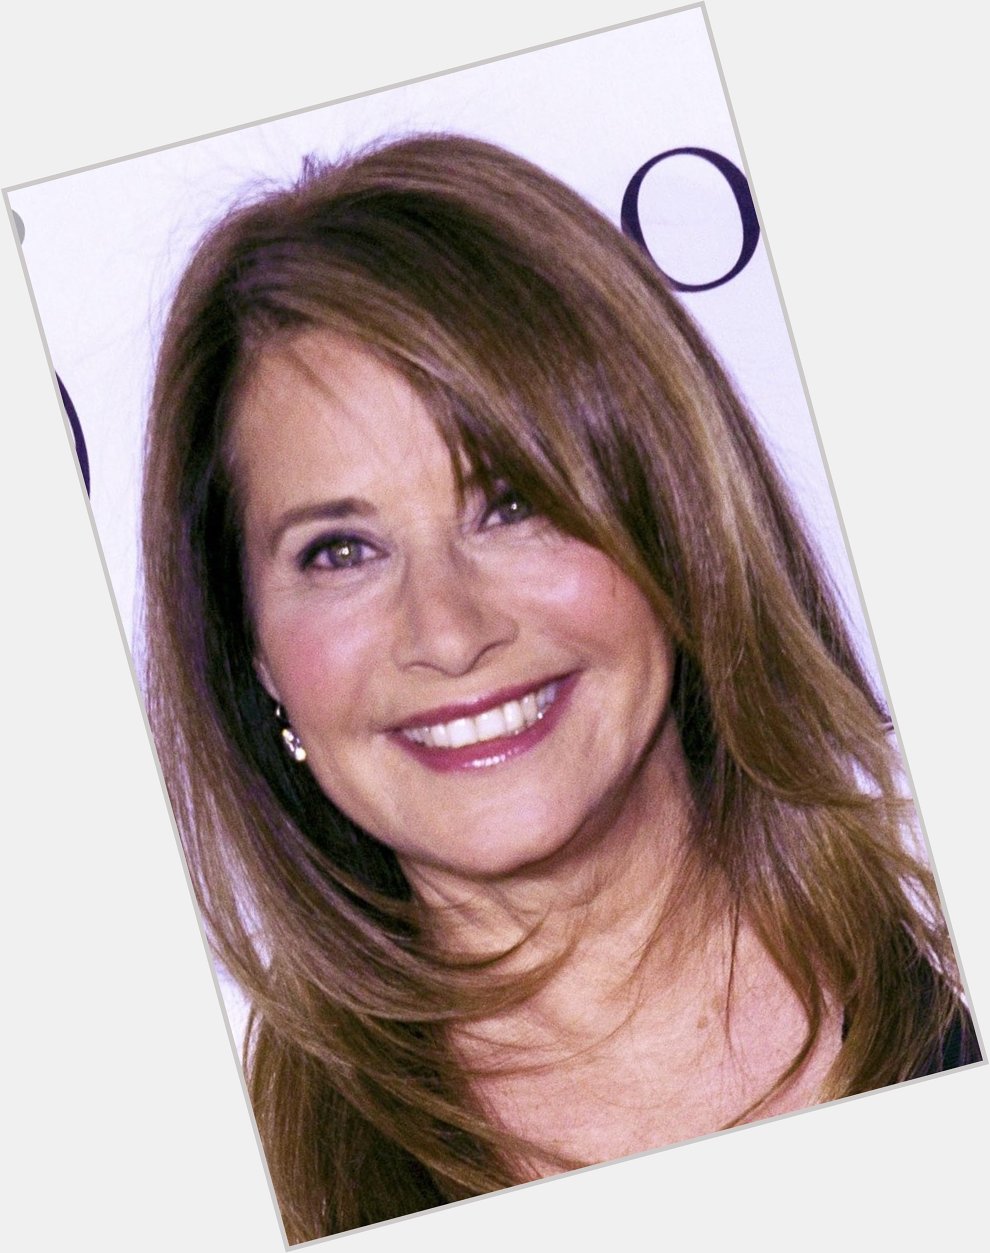 Happy Birthday Lorraine Bracco!! We love you & thank you for always supporting our show! 